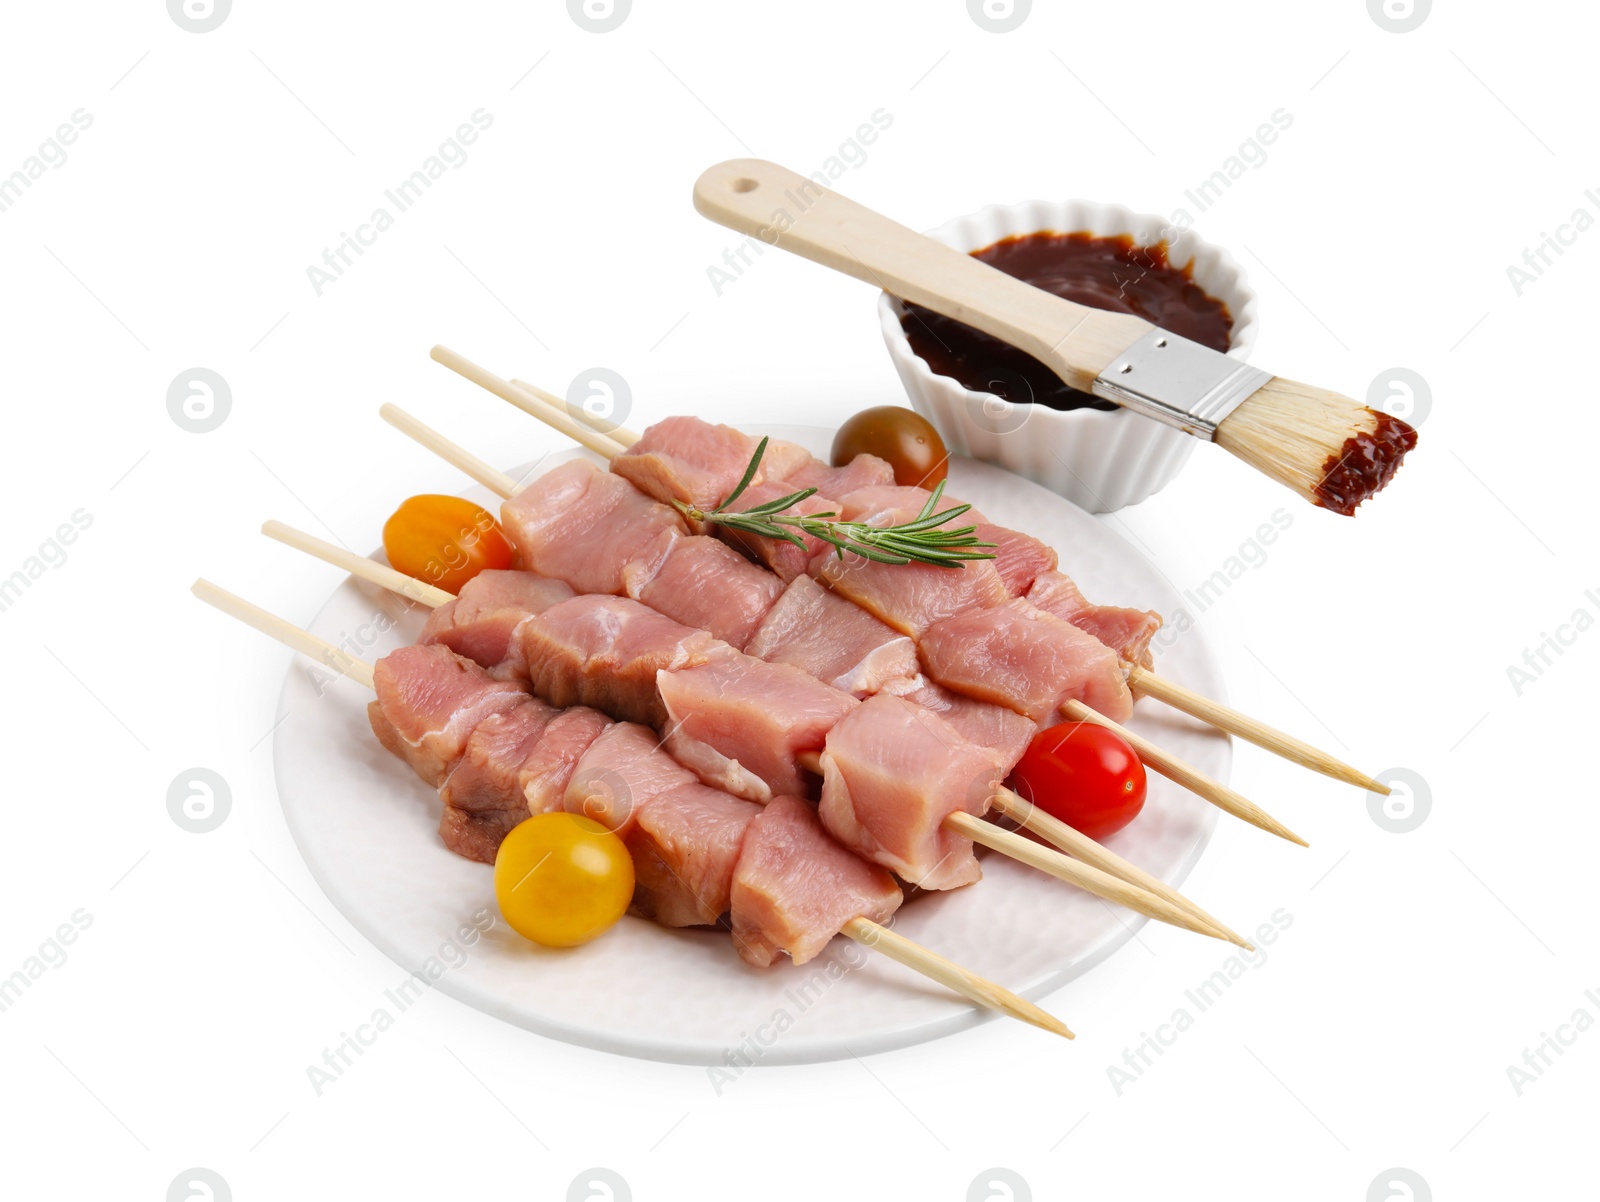 Photo of Skewers with pieces of raw meat, rosemary, tomatoes and marinade isolated on white